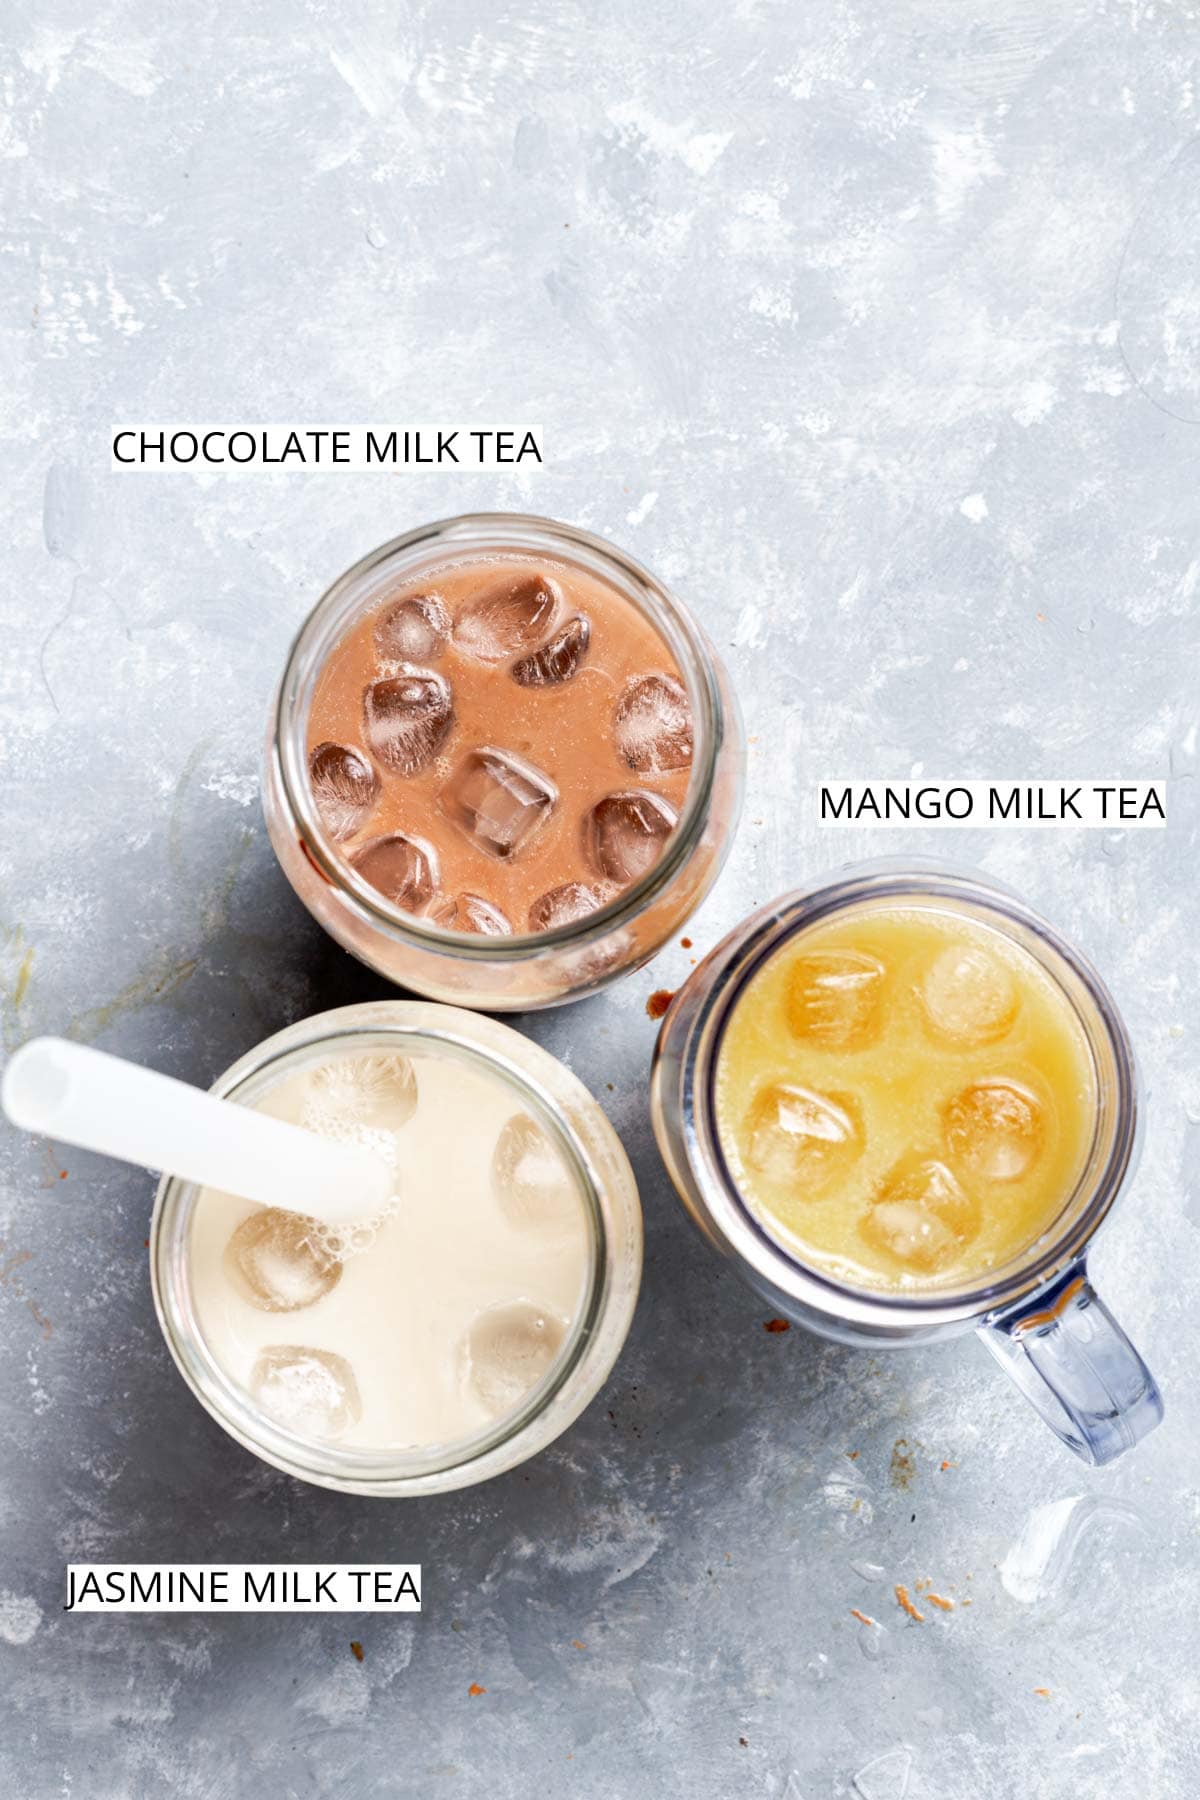 Three variations of milk tea next to each other on a flat grey surface.